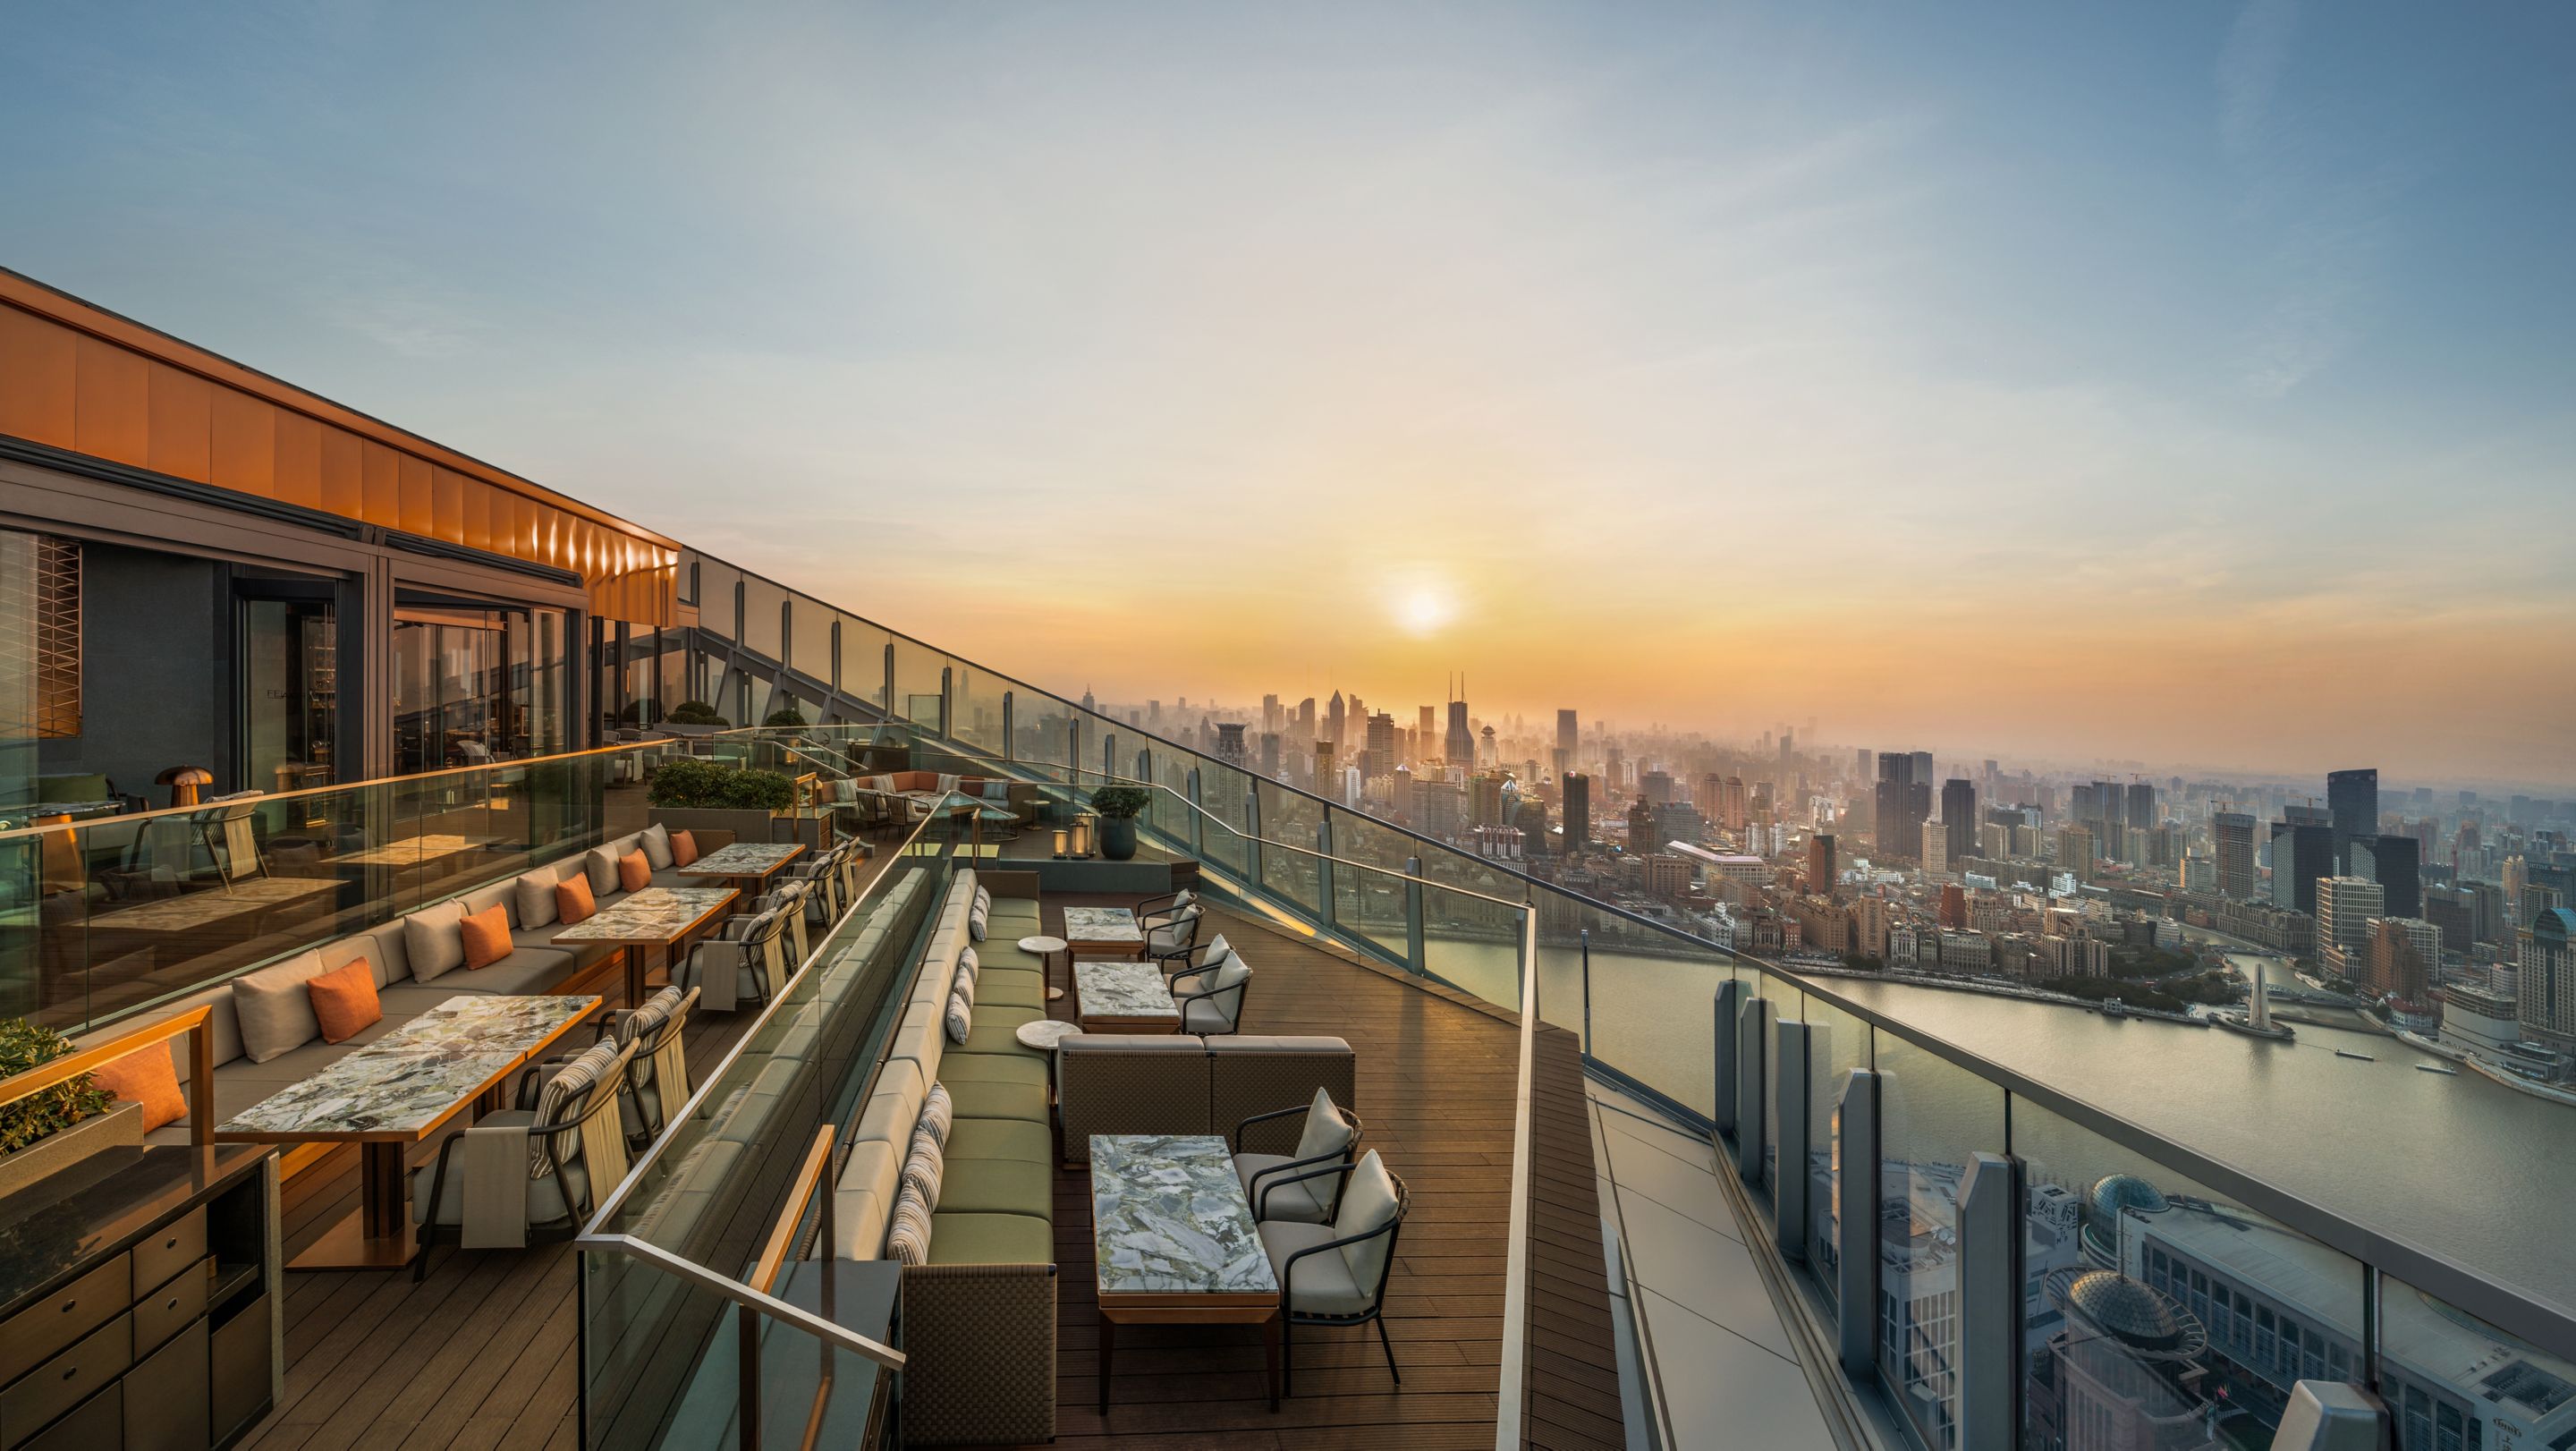 Flair Rooftop Terrace Sunset View